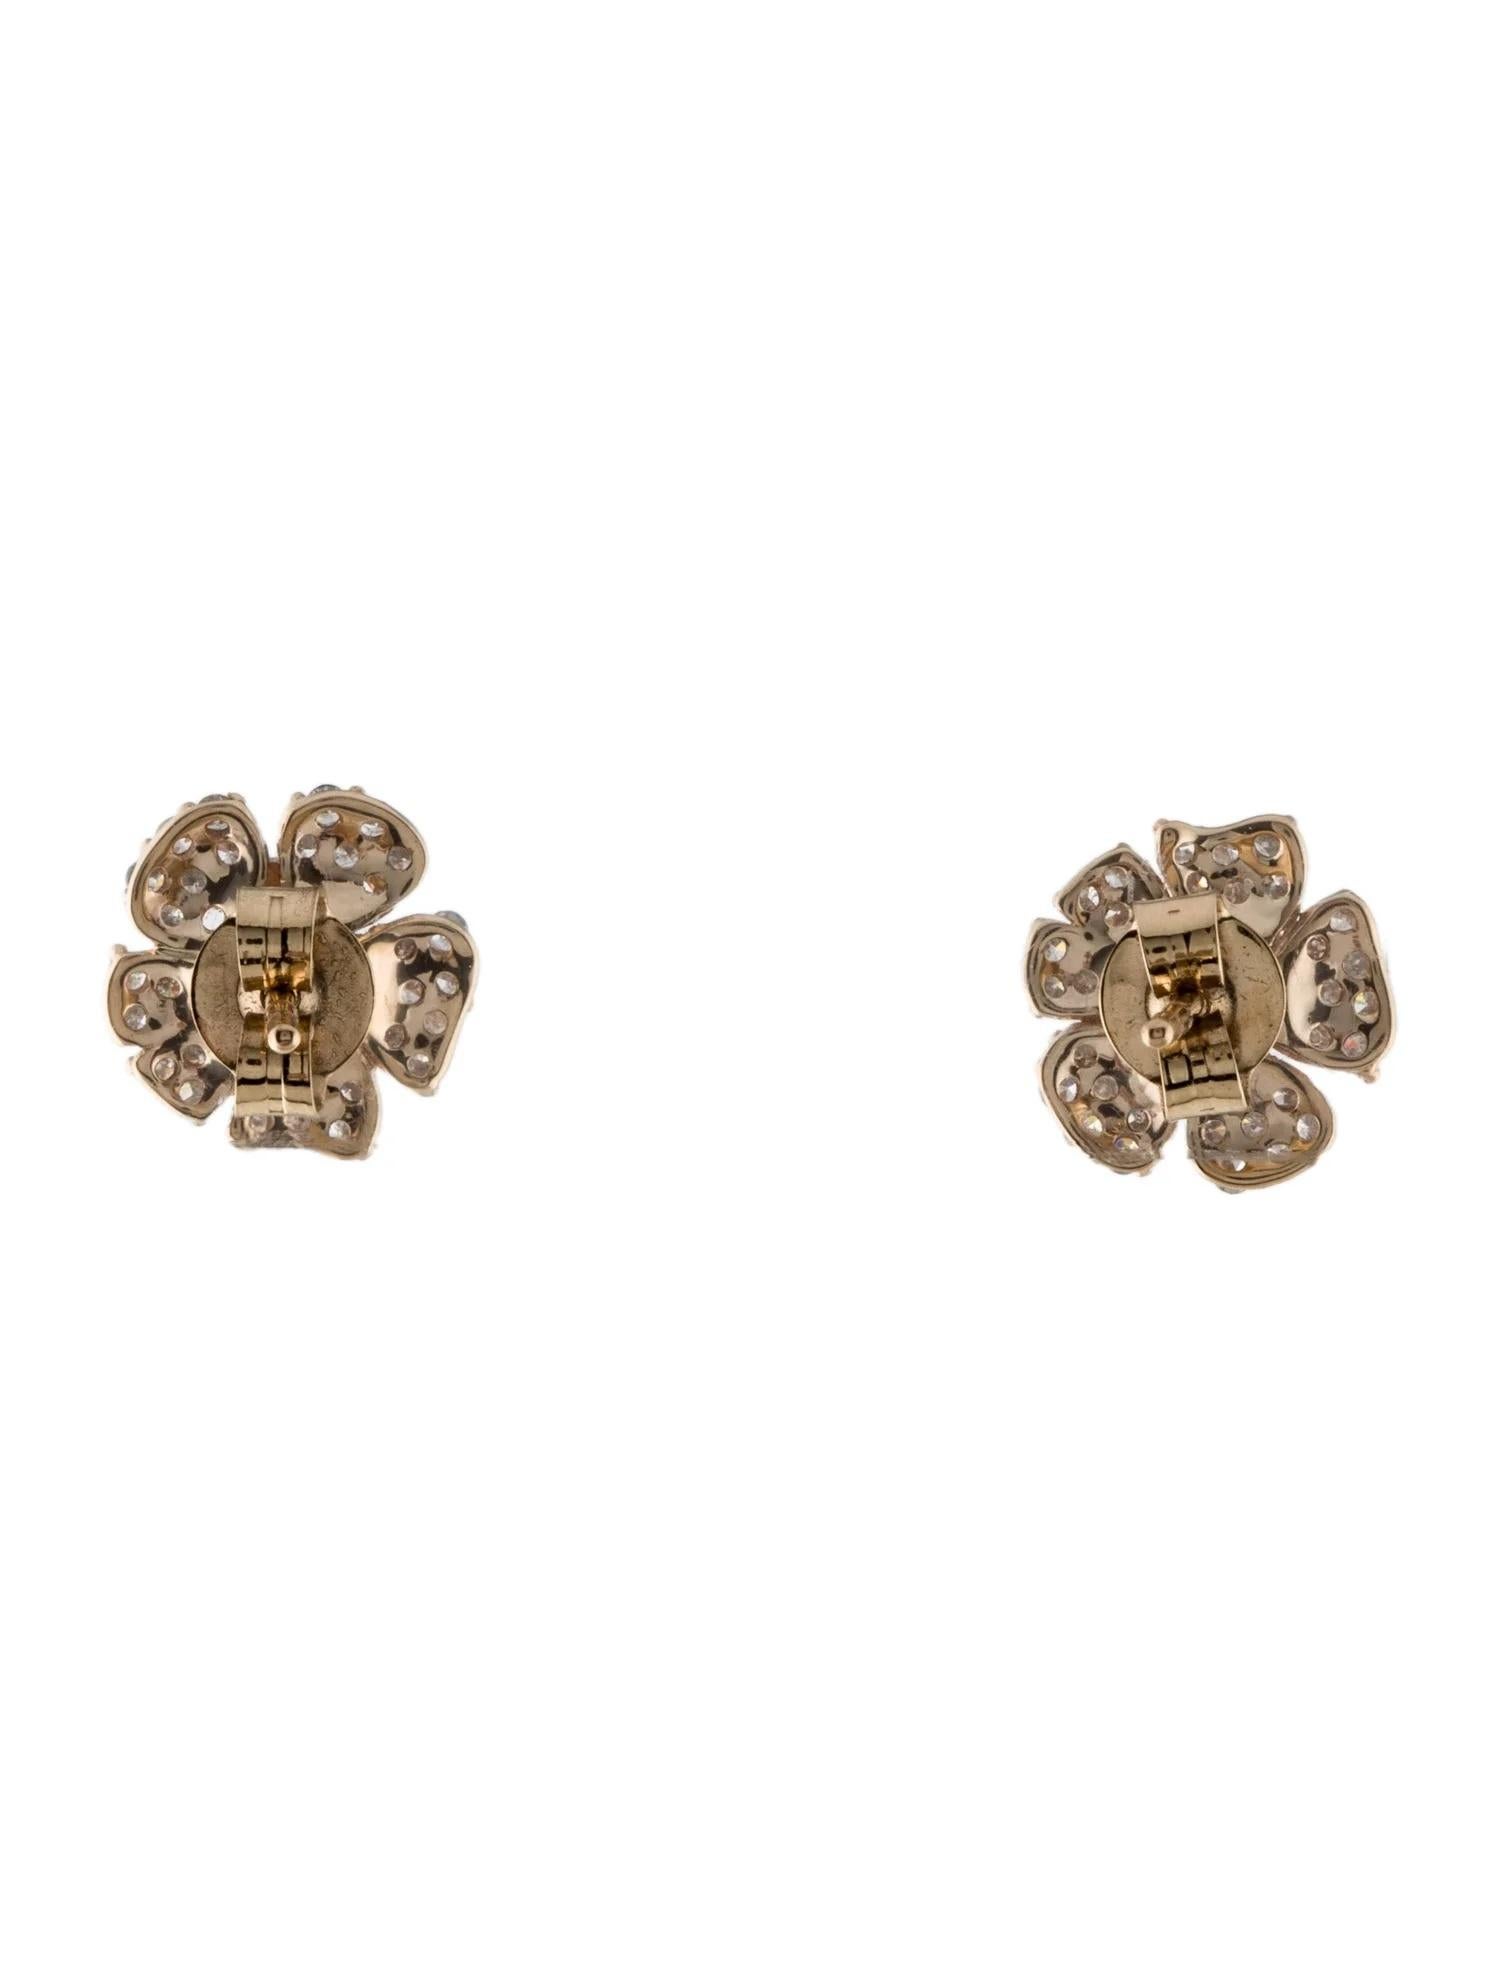 Artist 14K Diamond Stud Earrings - Classic Elegance in Yellow Gold, 0.63 Carats For Sale